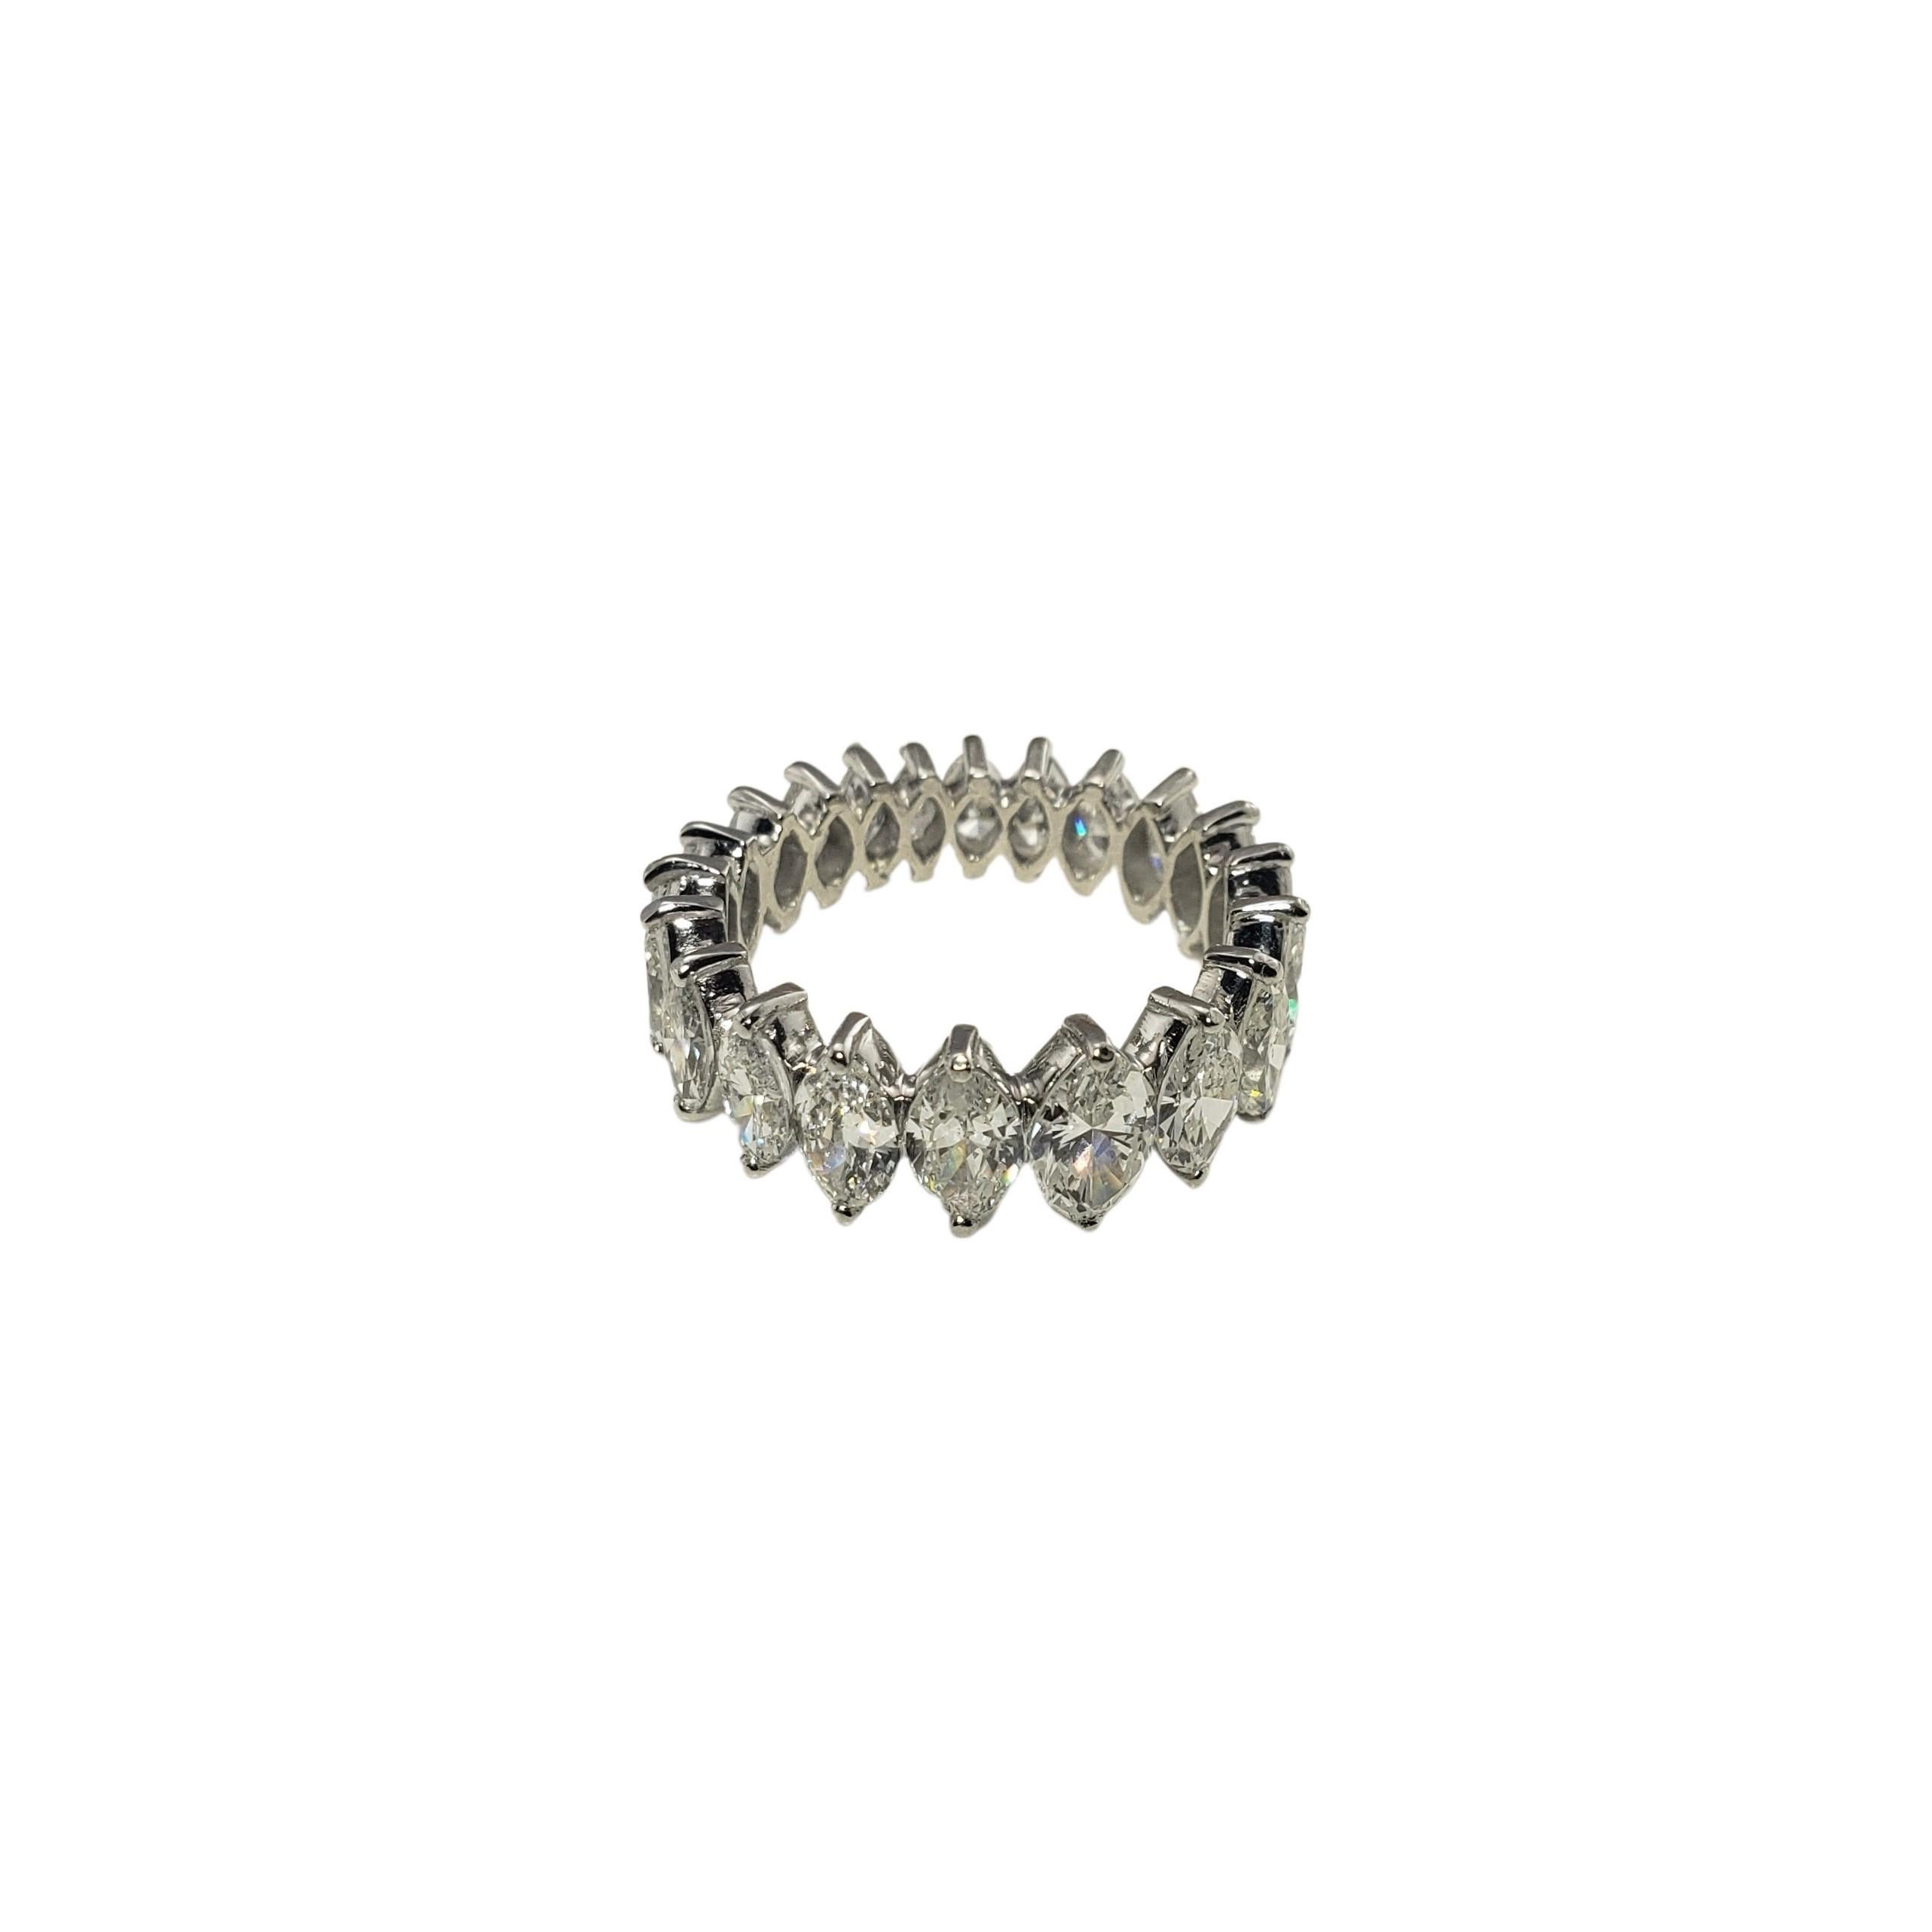 Platinum Gold Marquise Diamond Eternity Band Ring Size 6.75

This sparkling eternity band features 21 graduated marquis diamonds set in platinum.  

Width:  8 mm.

Approximate total diamond weight:  3.85 cts (largest stone is .48cts)

Diamond color: